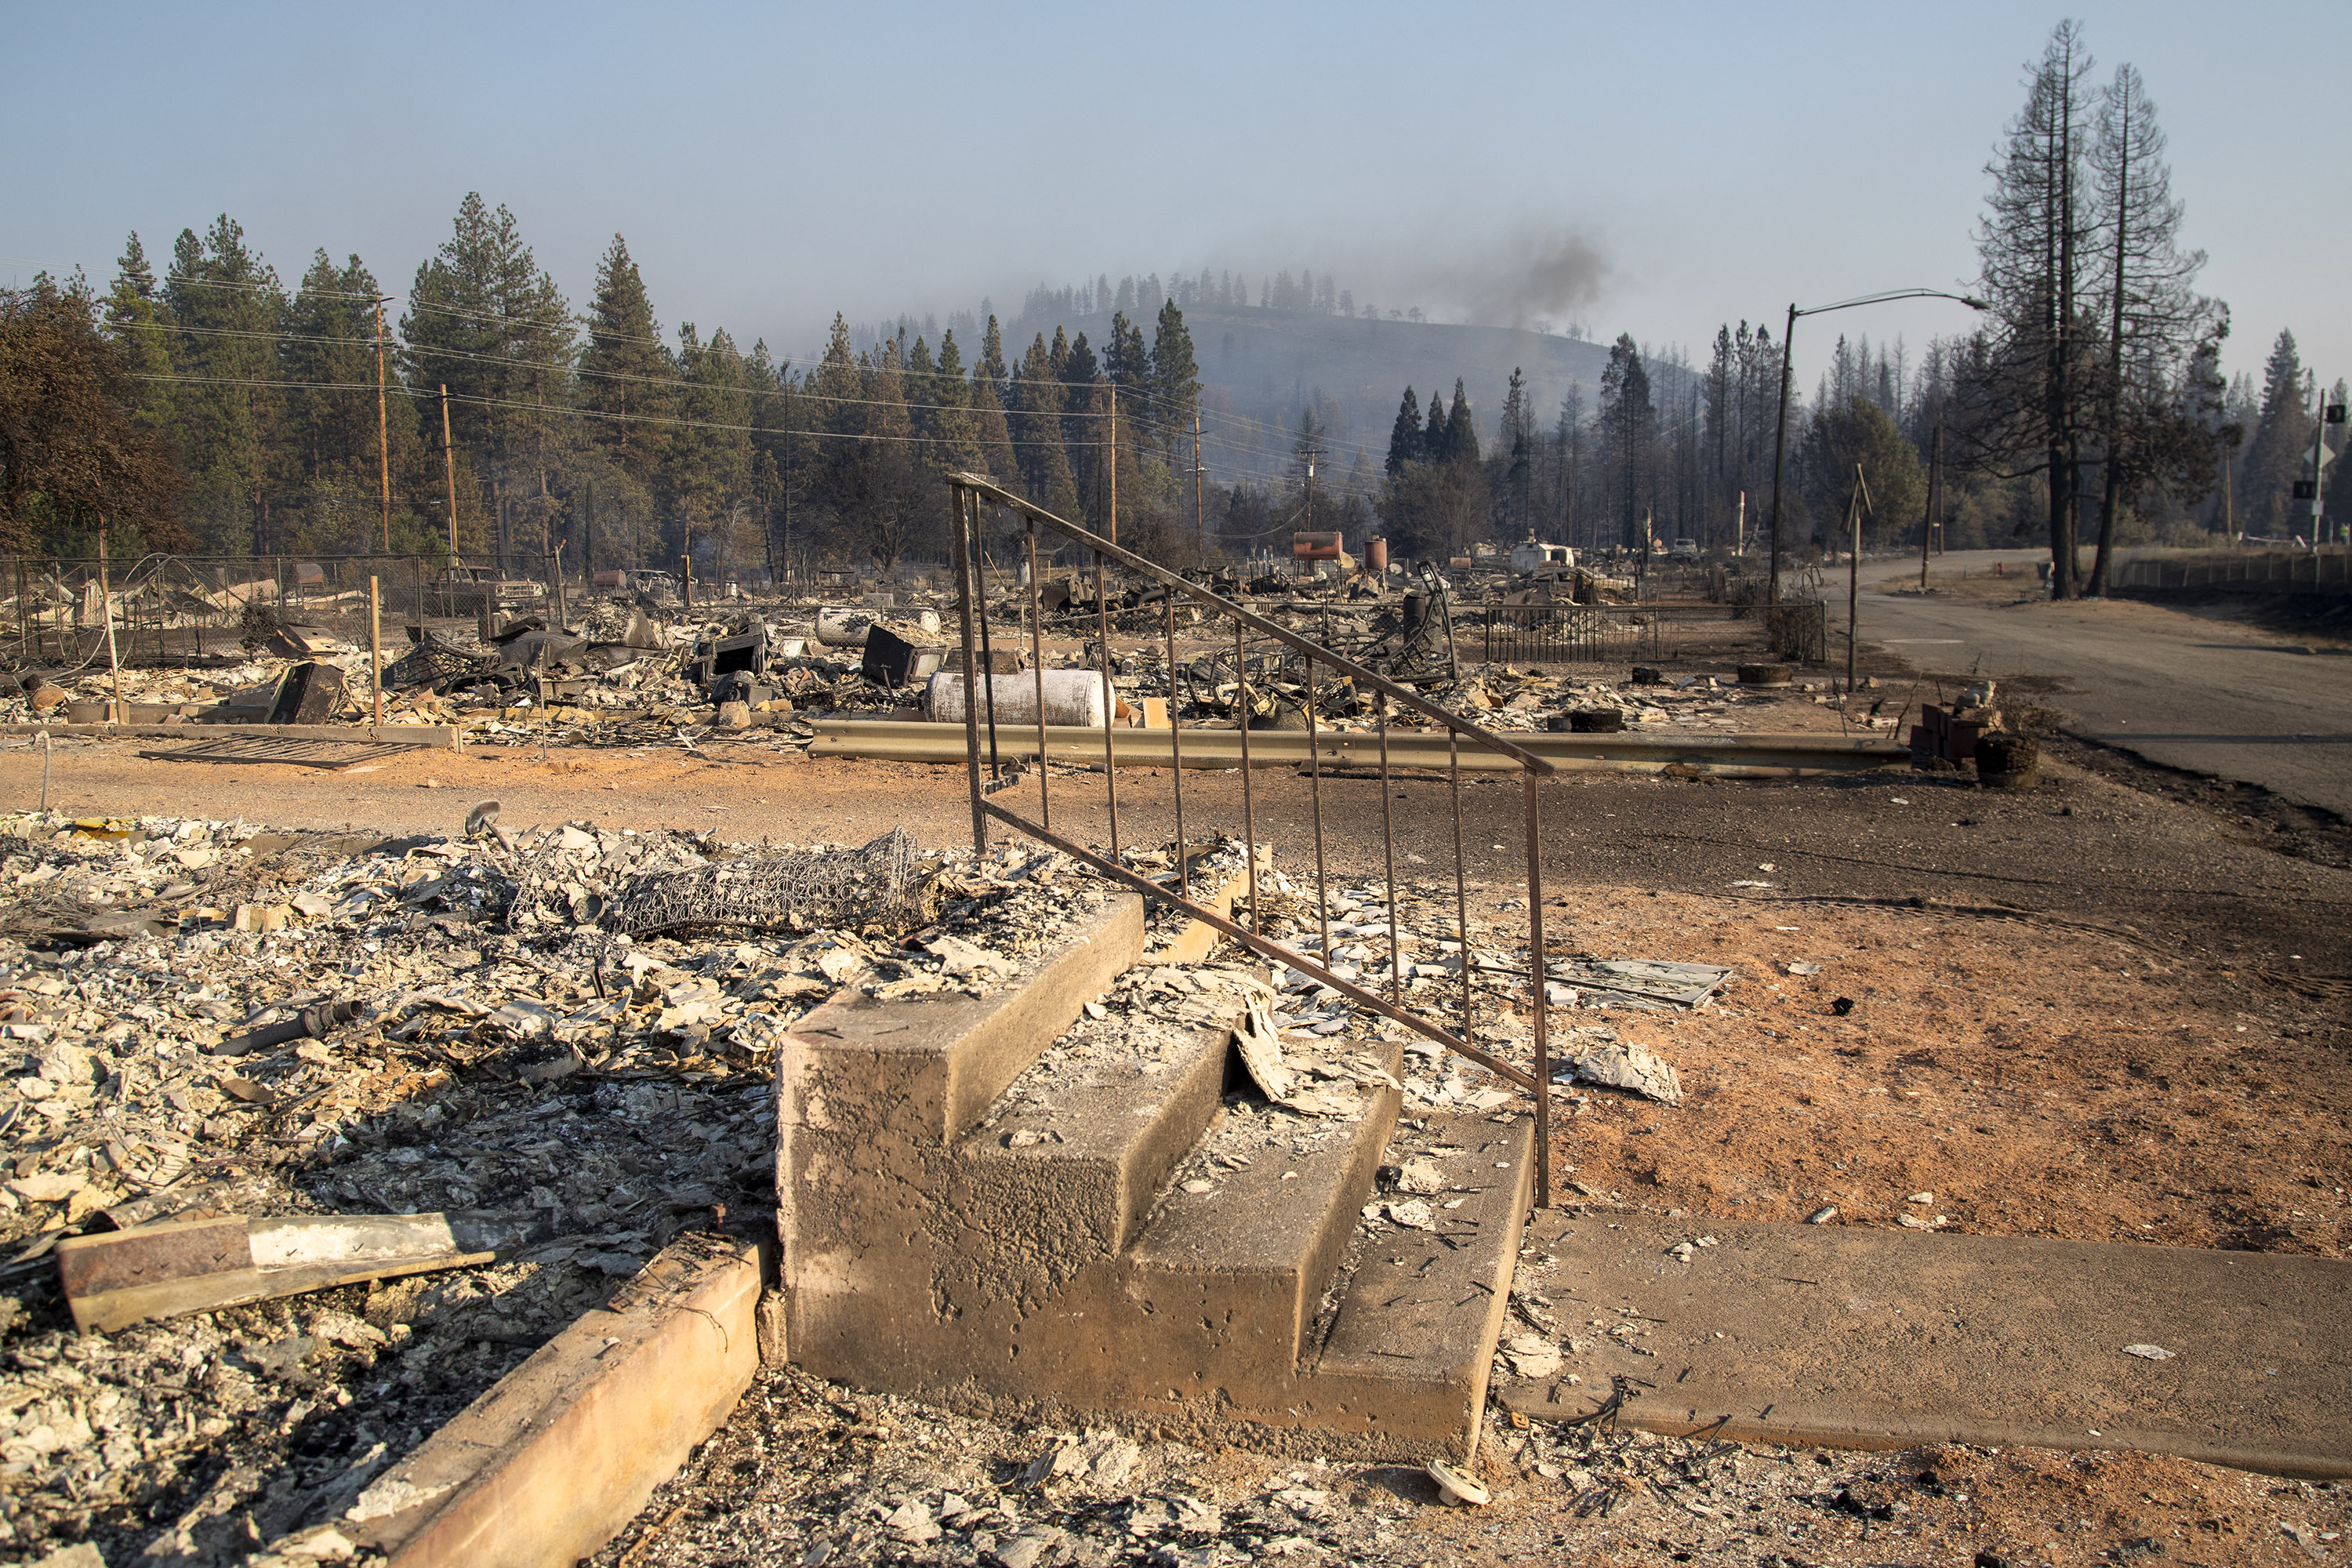 A home in Weed, California, destroyed by the Mill Fire 